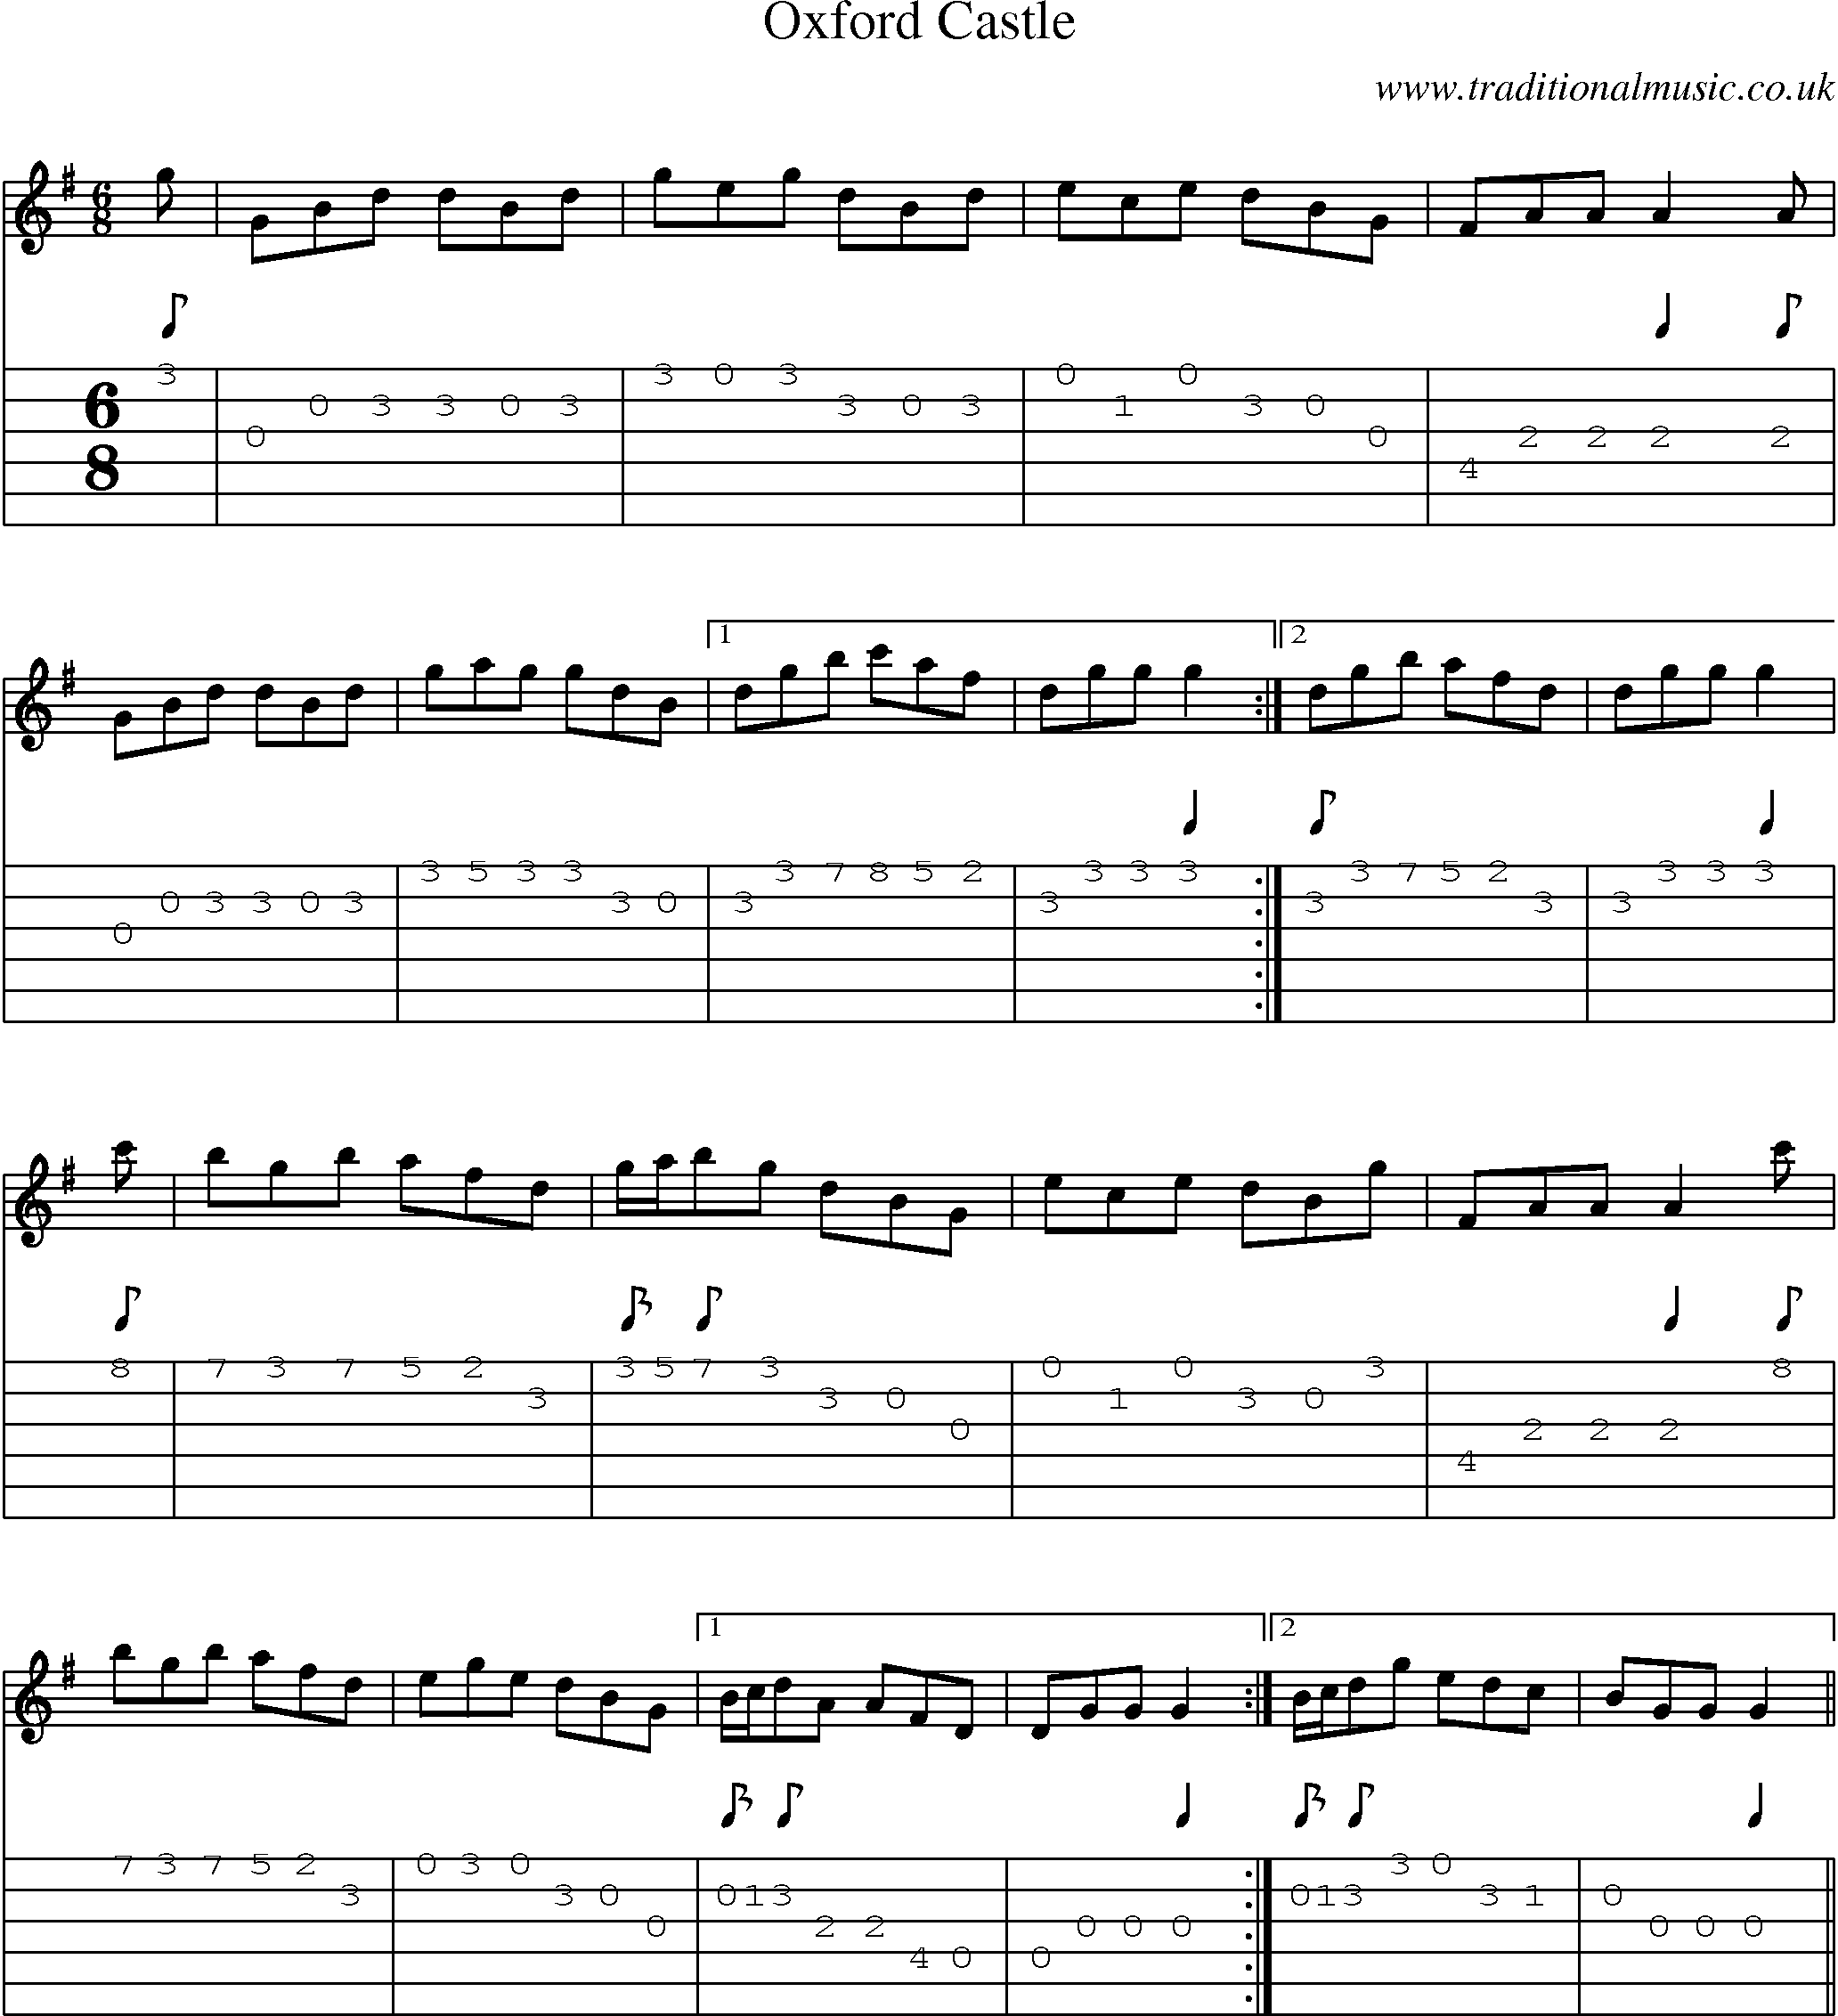 Music Score and Guitar Tabs for Oxford Castle